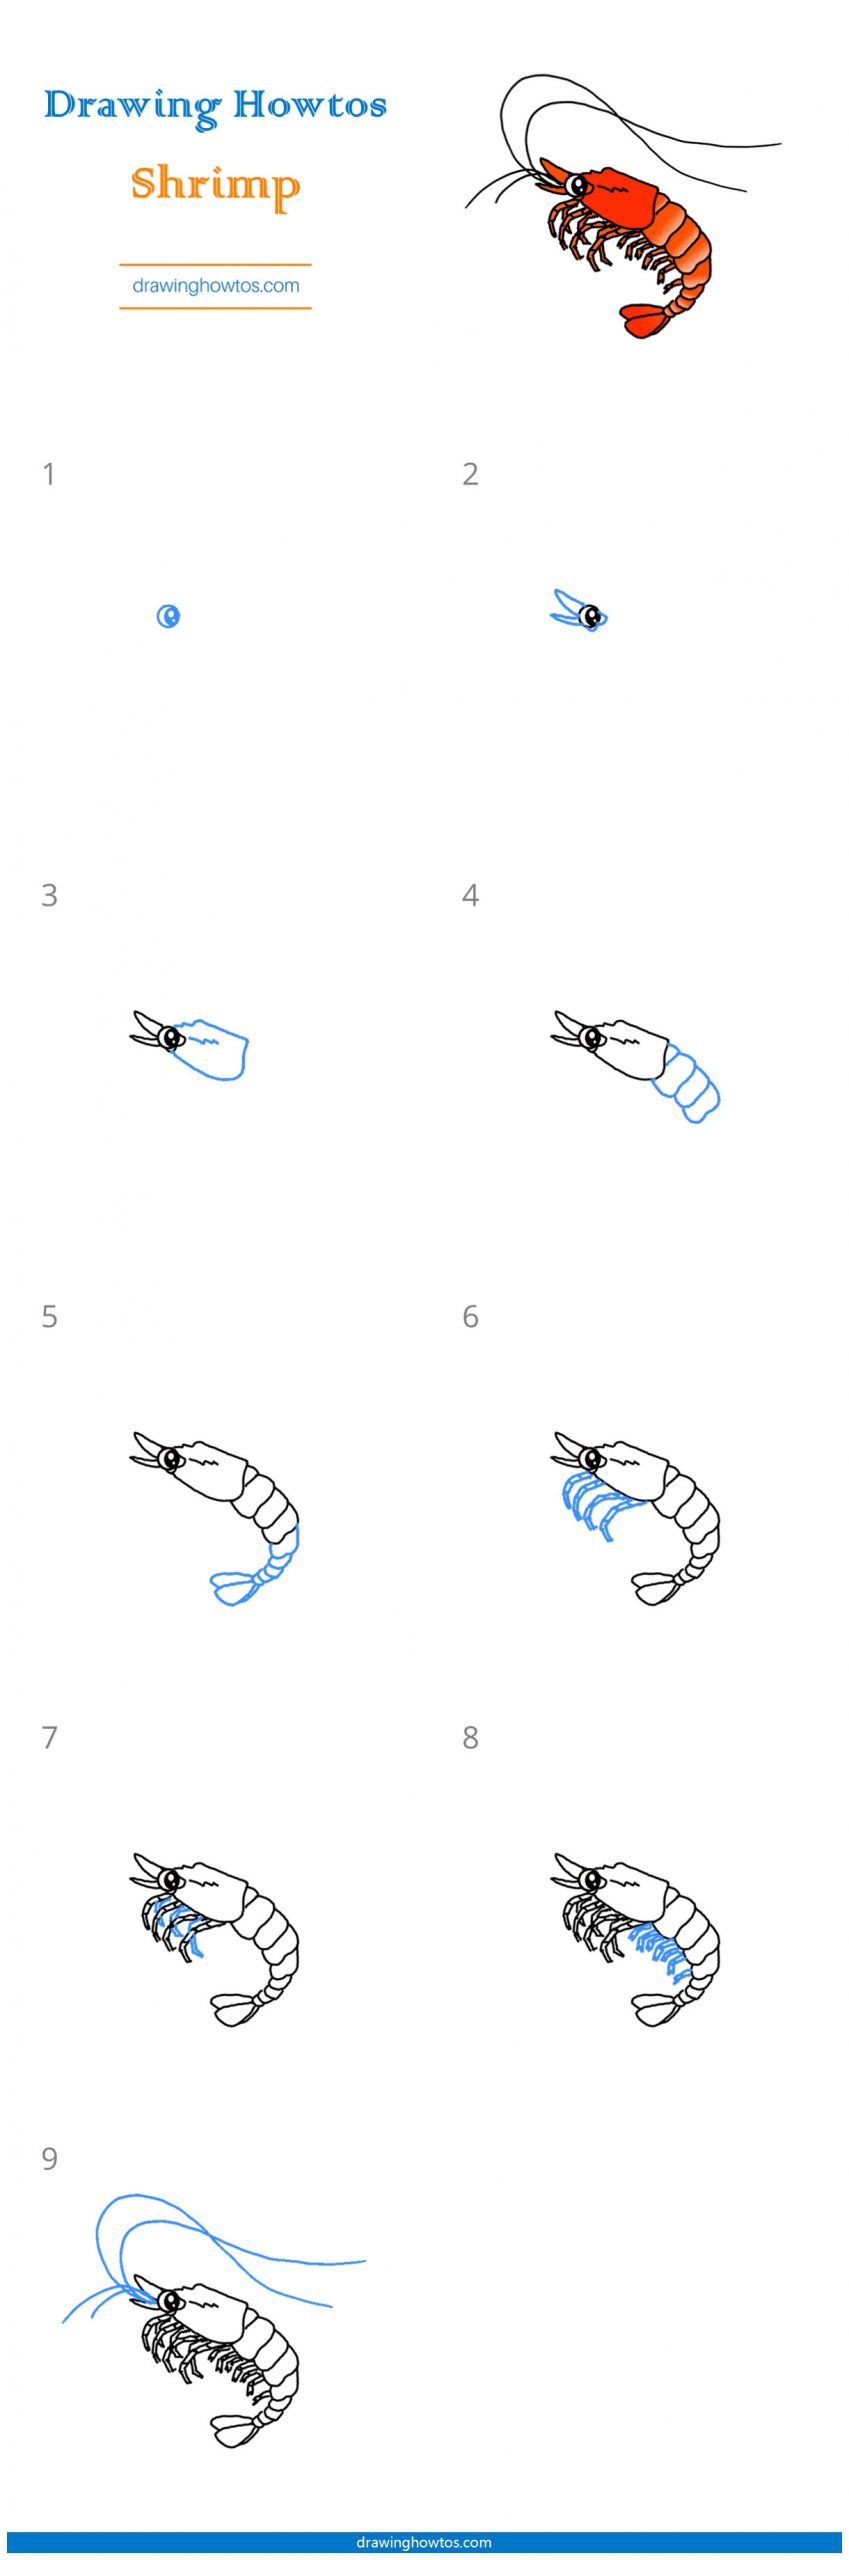 How to Draw a Shrimp Step by Step